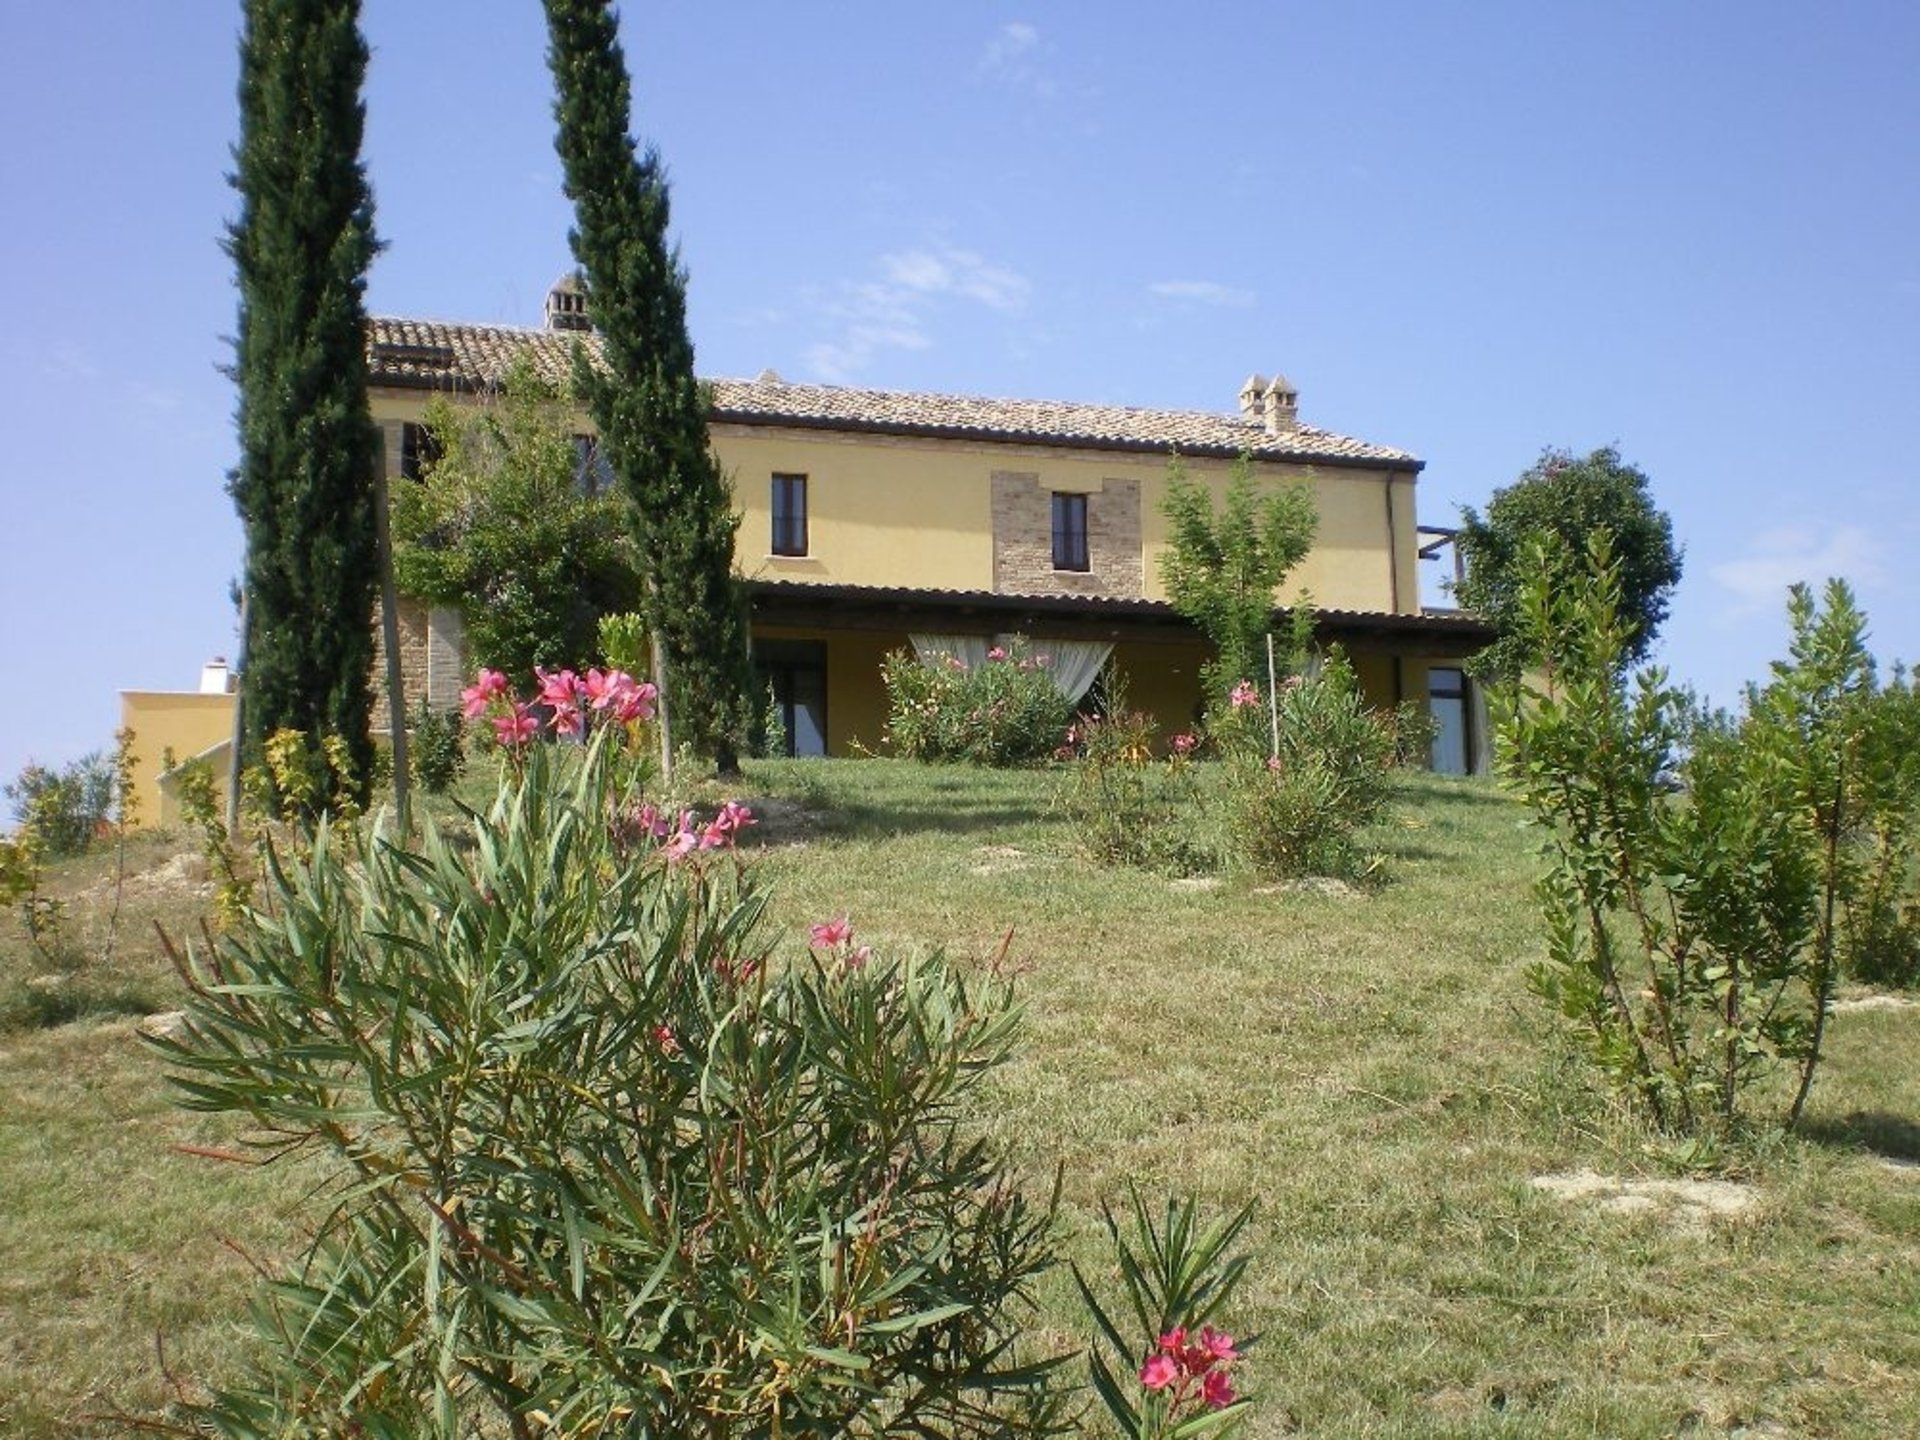 Adriatic holiday apartments for rent in Le Marche, Italy